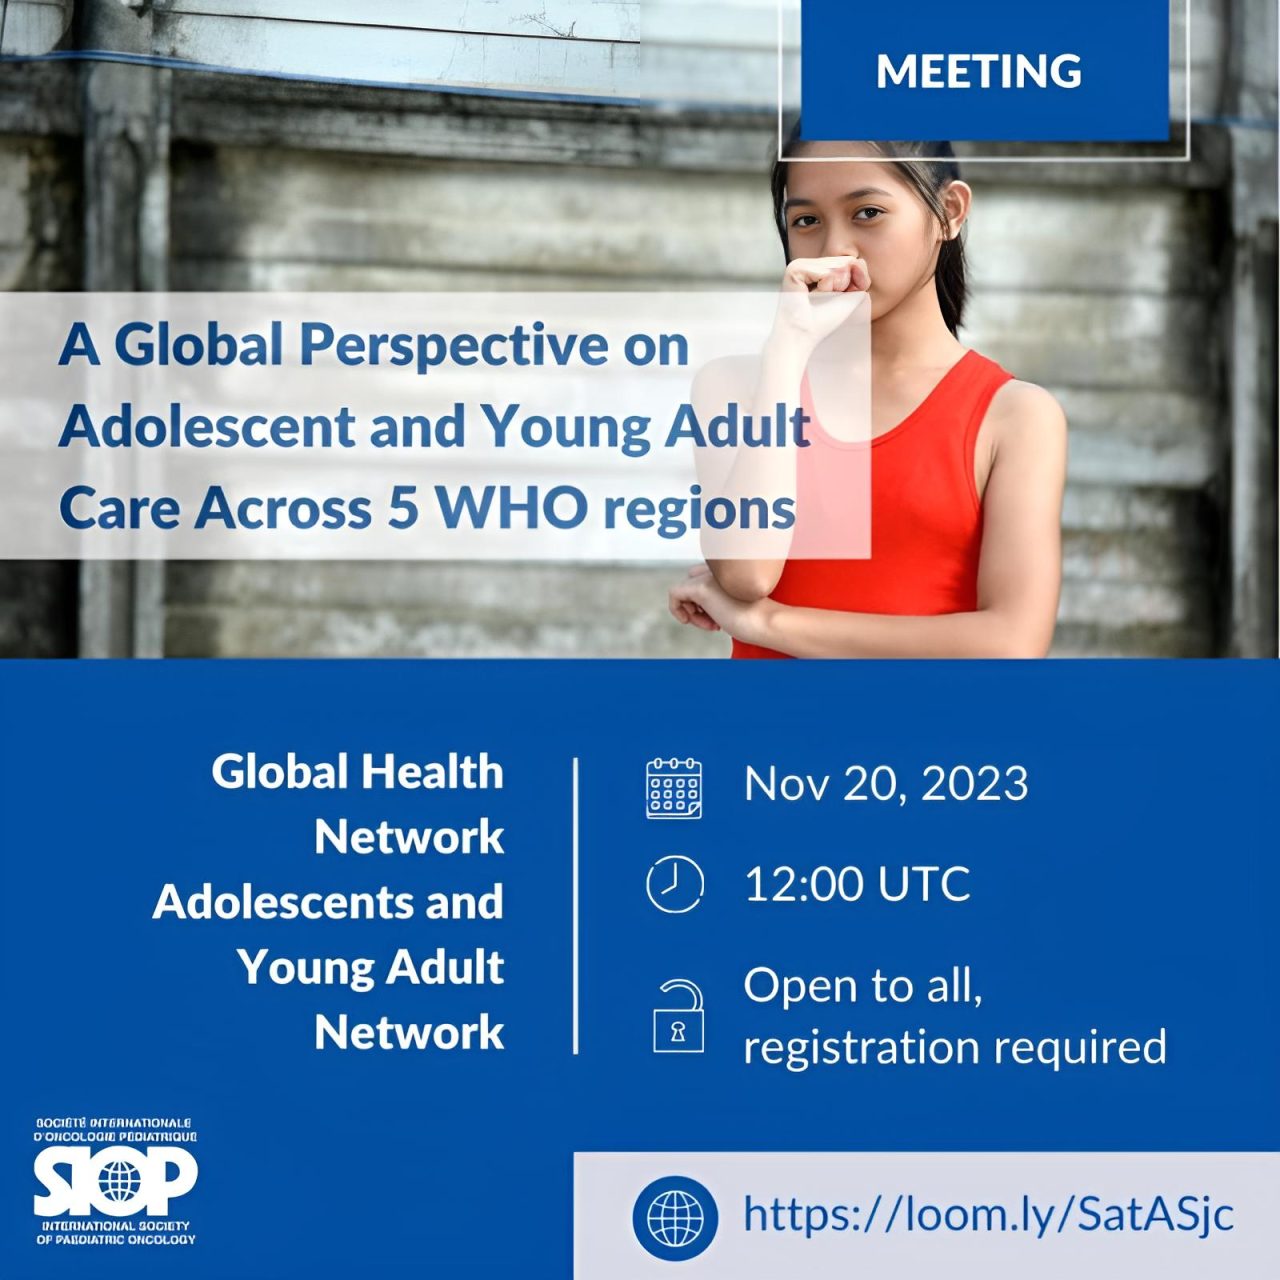 Ruzanna Papyan: Discover the latest insights on improving adolescent and young adult care globally